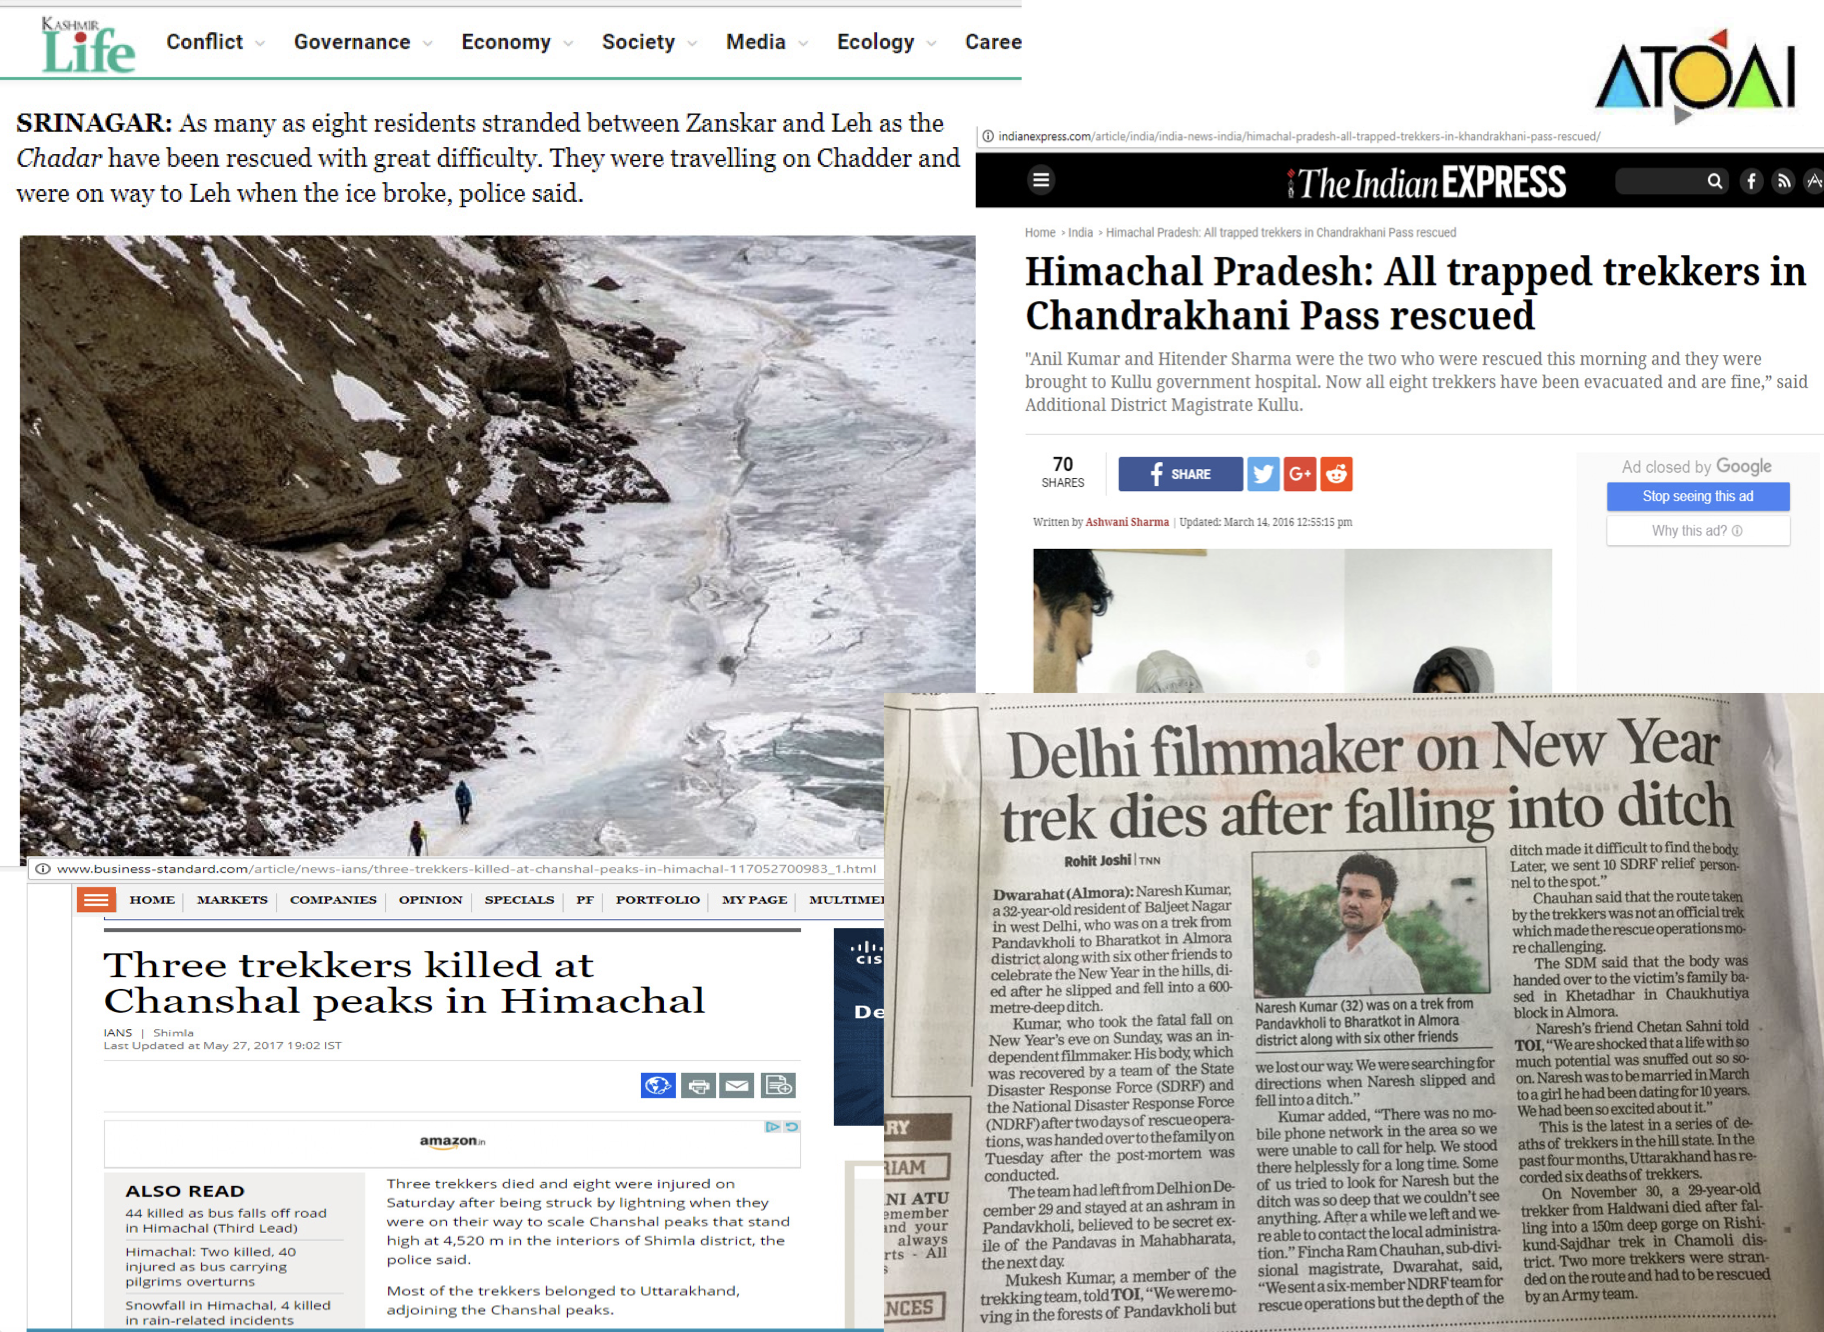 newspaper clippings showing deaths and injuries in the Indian mountains